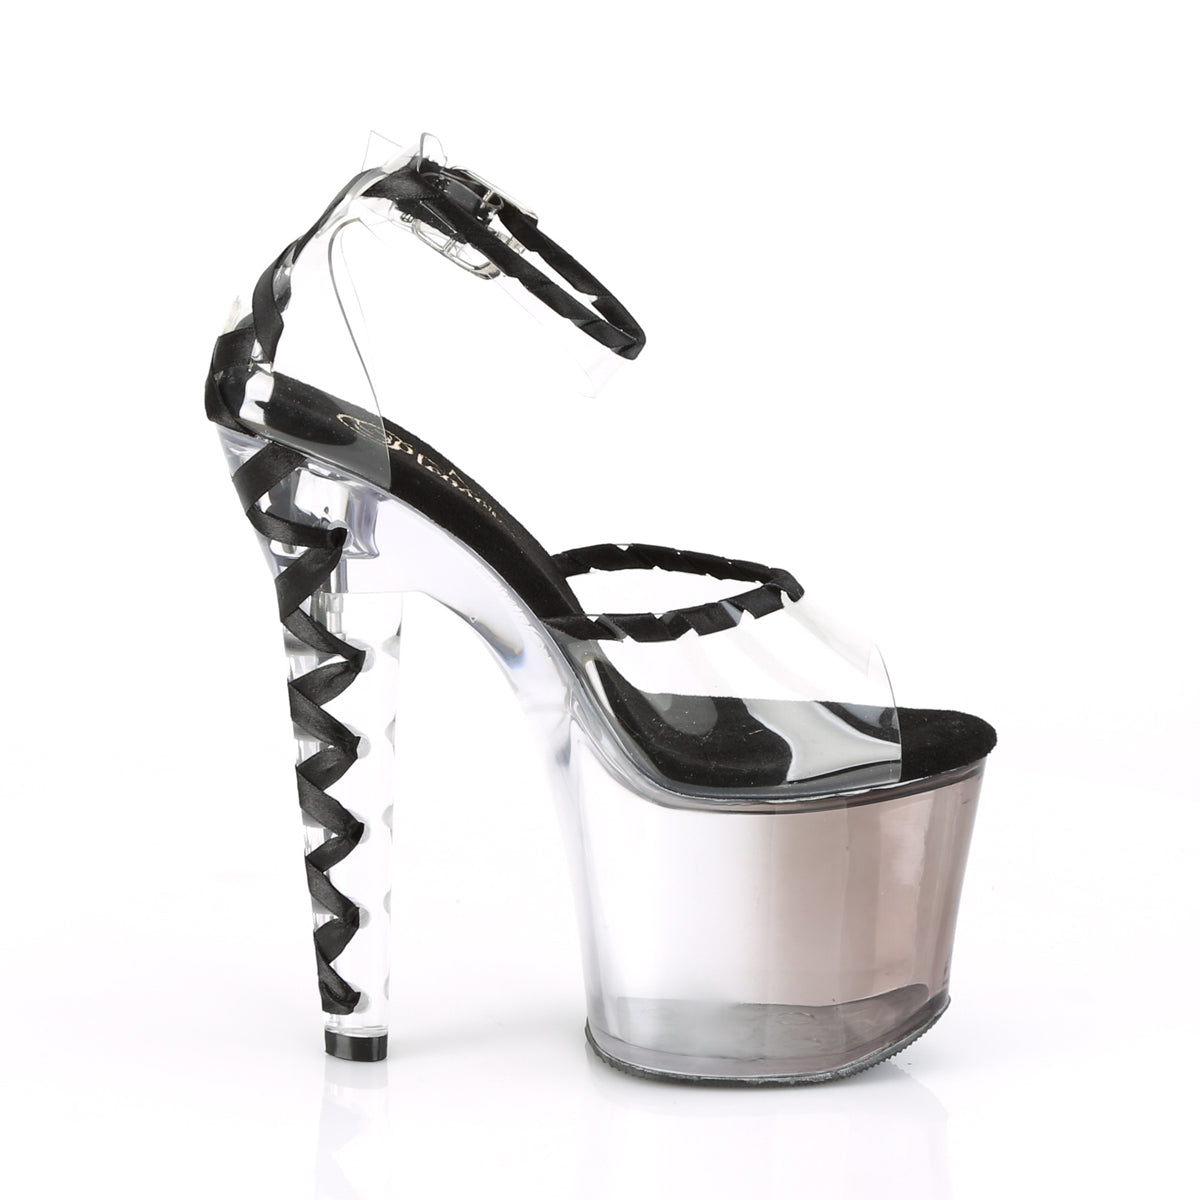 LOVESICK-712T 7" Heel Clear and Black Pole Dancing Platforms-Pleaser- Sexy Shoes Fetish Heels